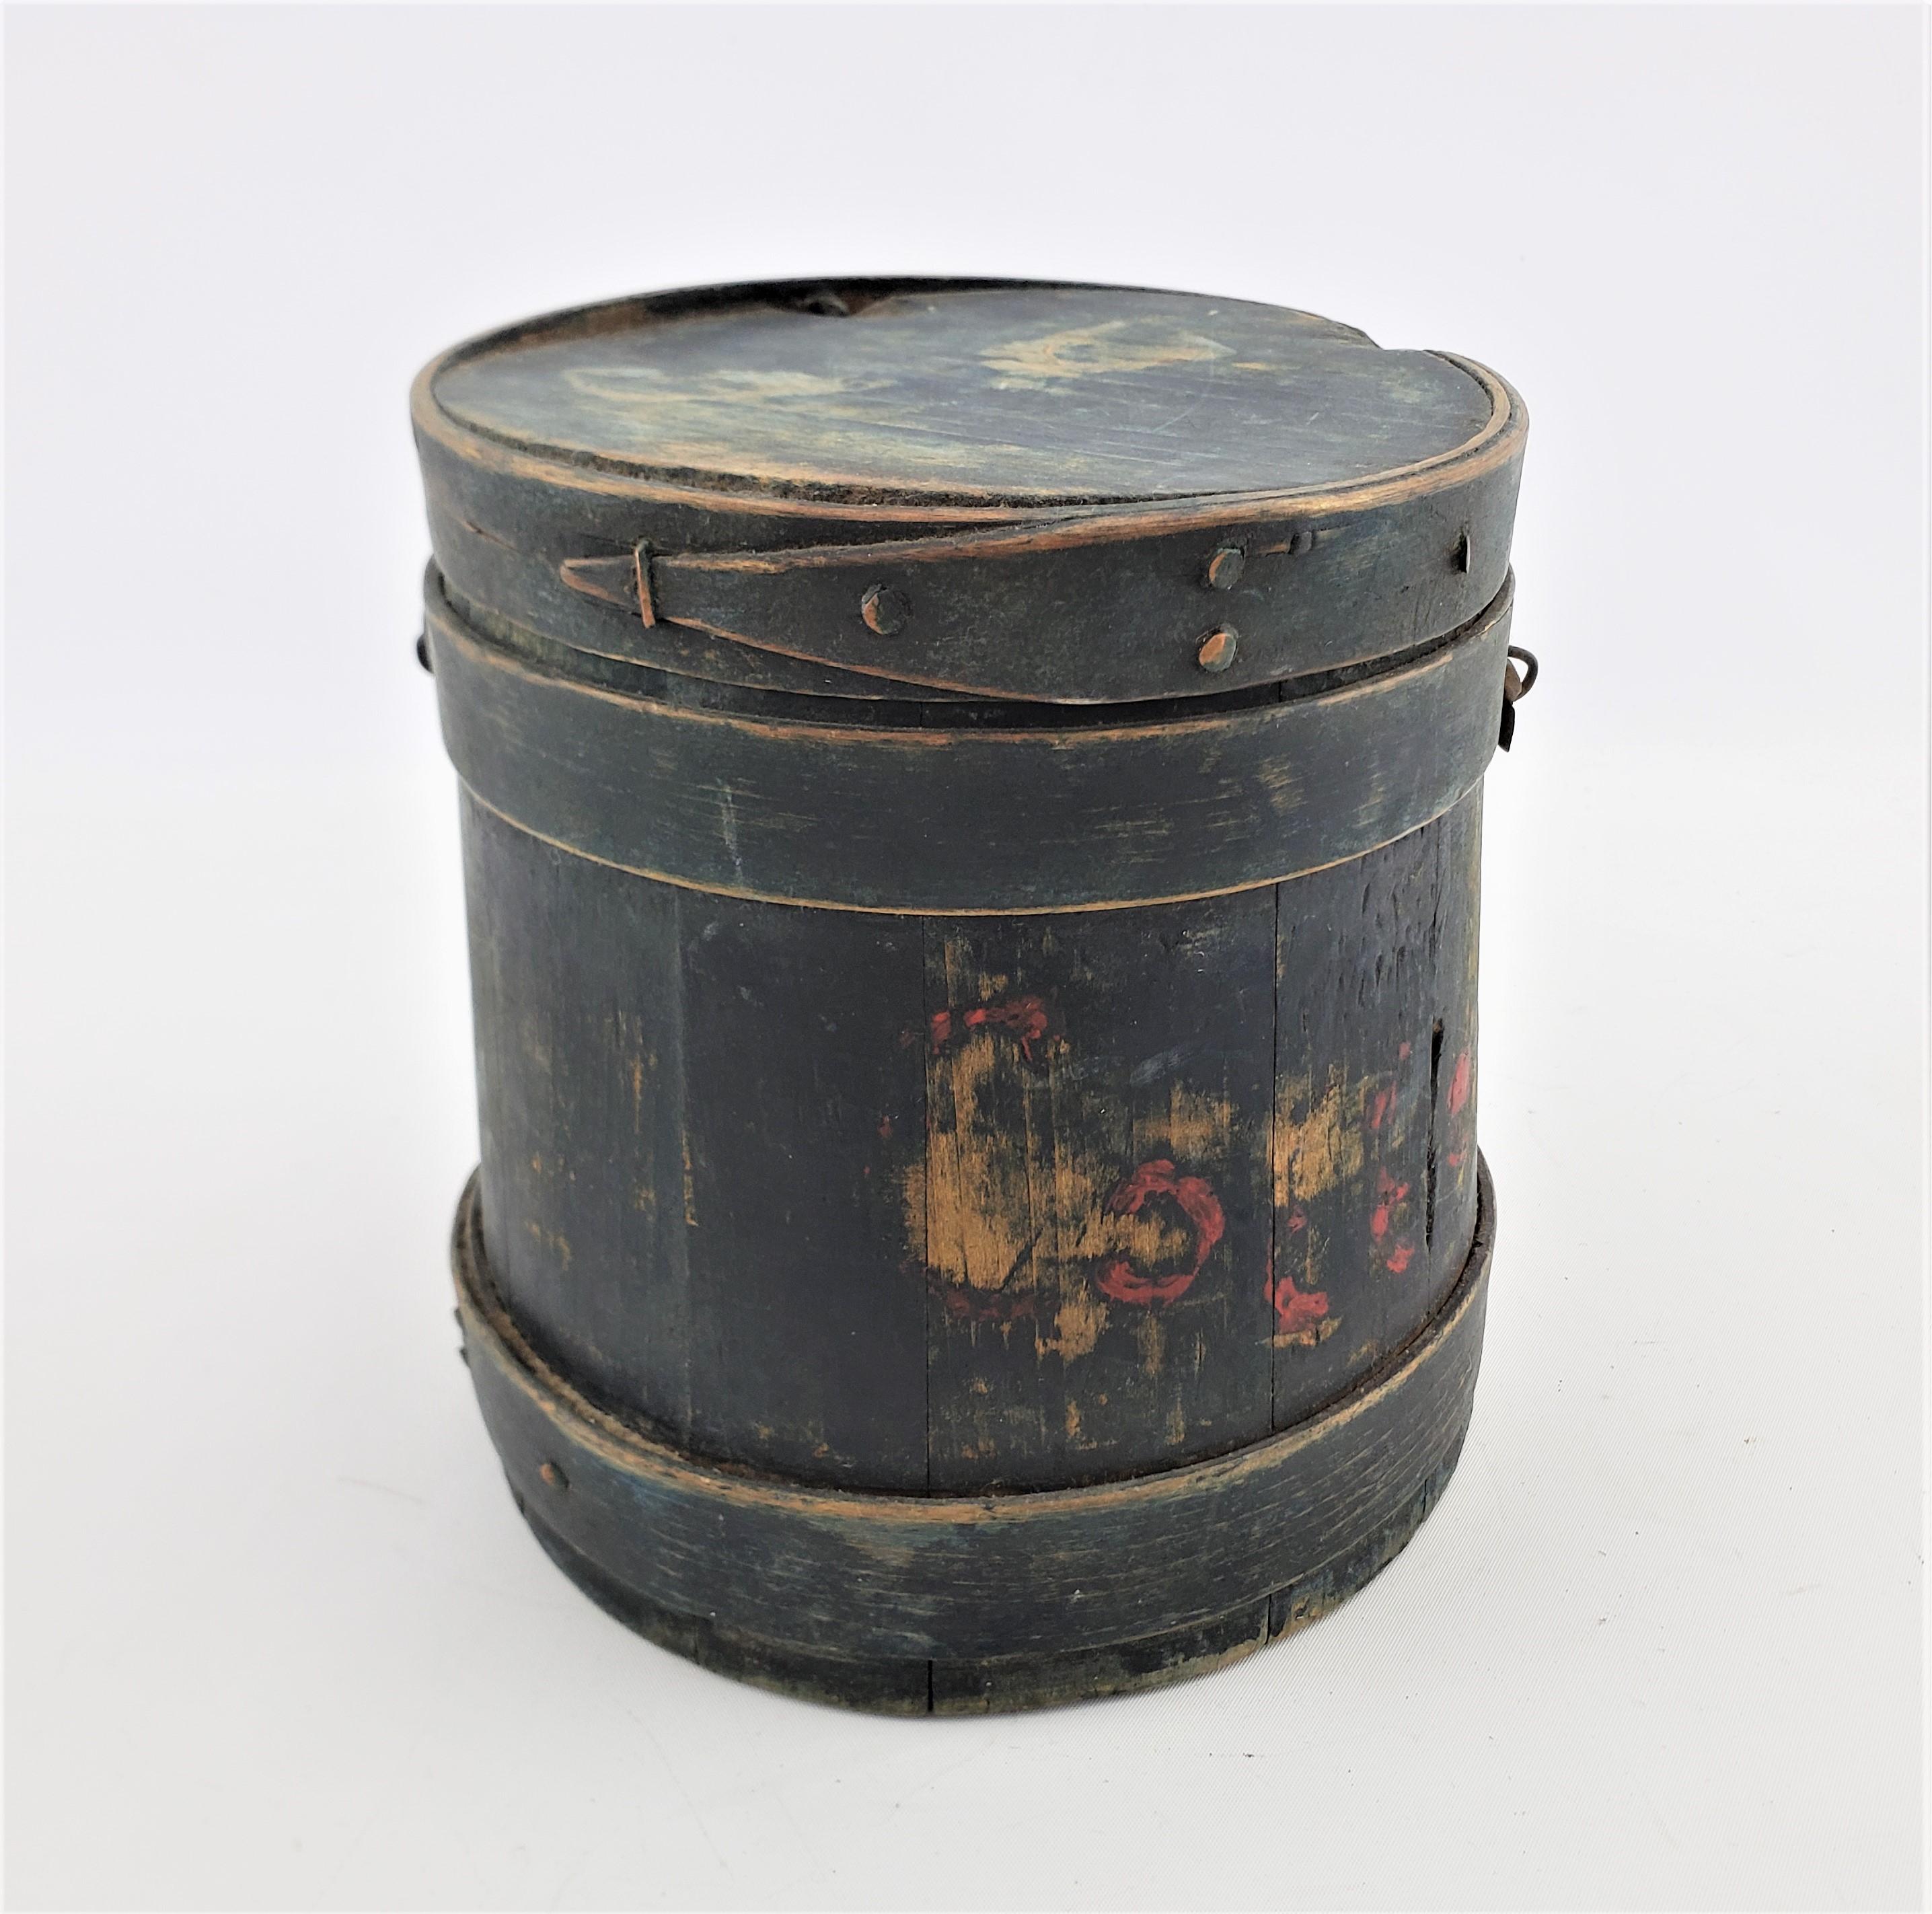 Hand-Painted Antique Painted Primitive Covered & Finger Staved Sugar Pail, Bucket or Firkin For Sale